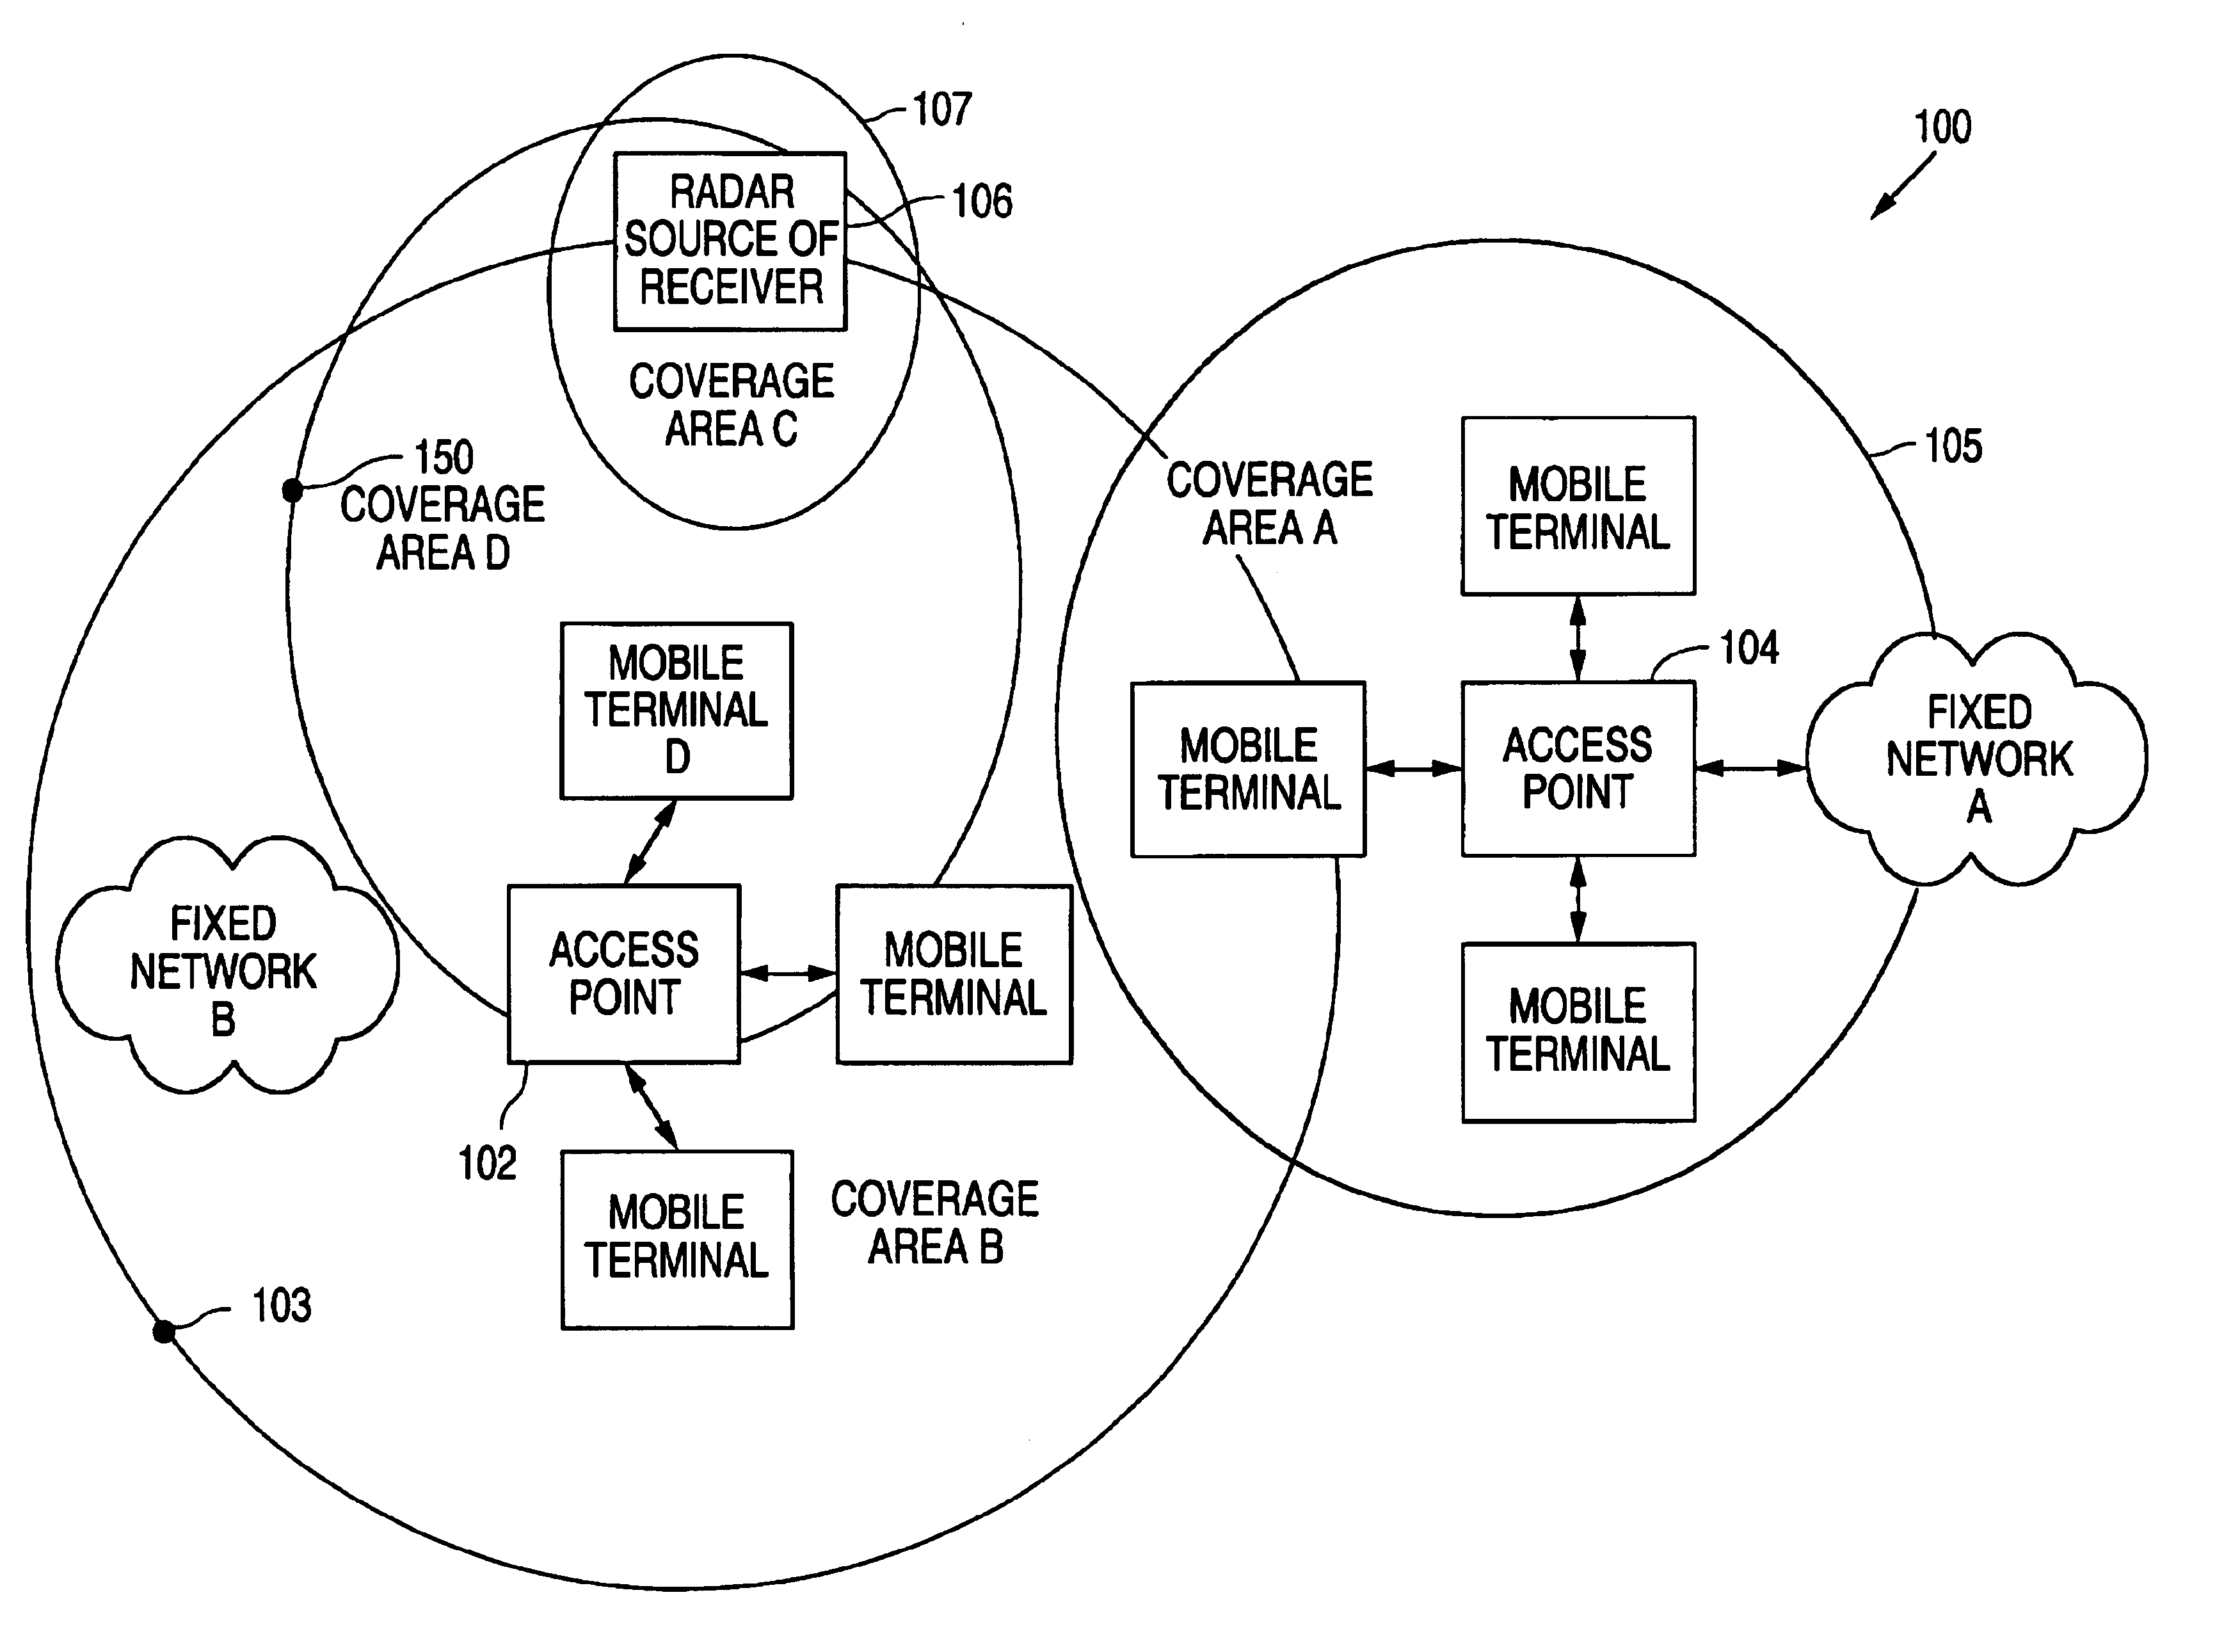 Method and apparatus for physical layer radar pulse detection and estimation